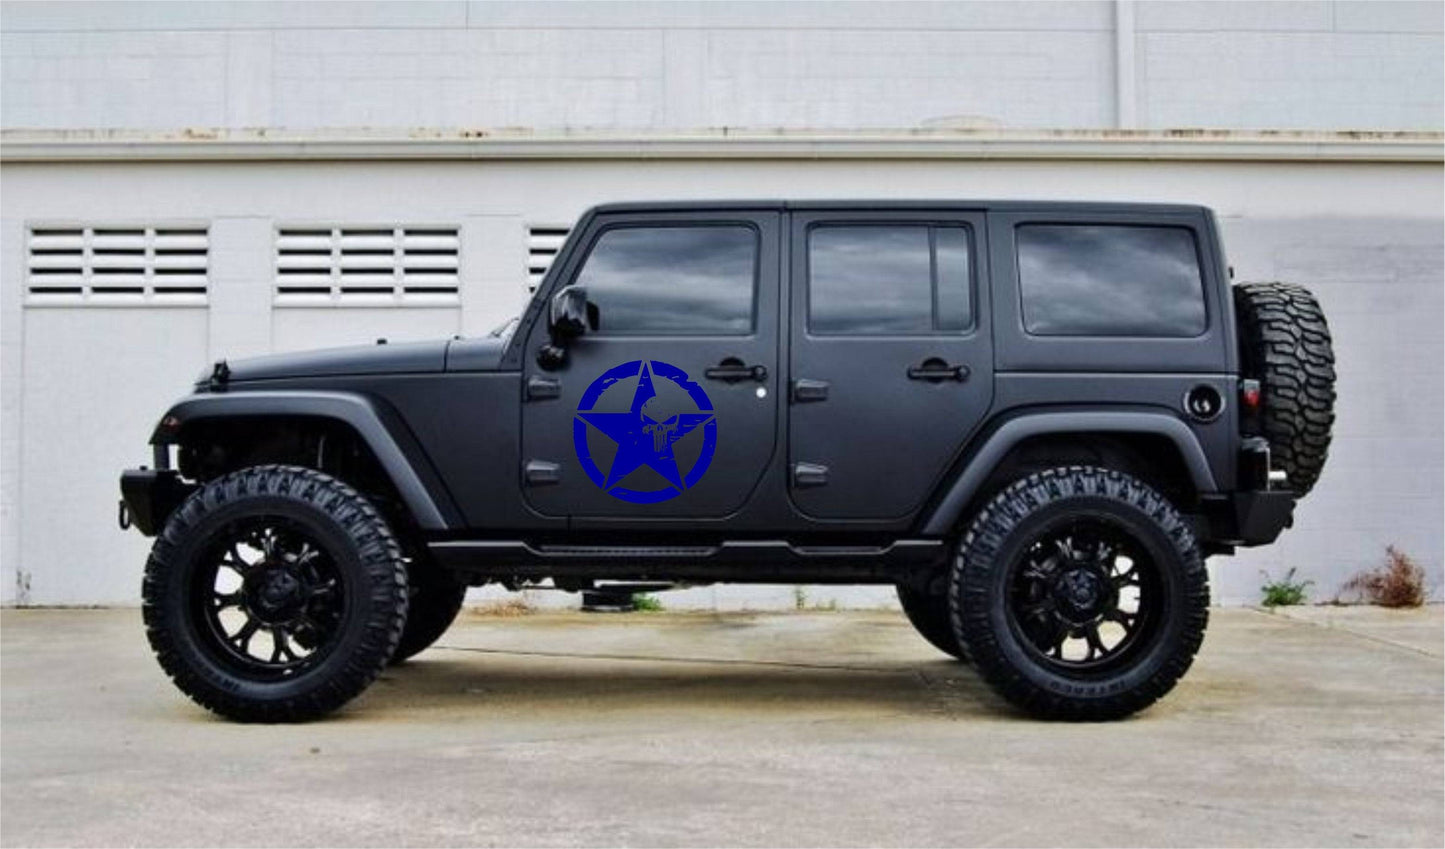 Military Star Punisher Decal for Trucks, Jeeps, Cars, SUVs | Sizes Available